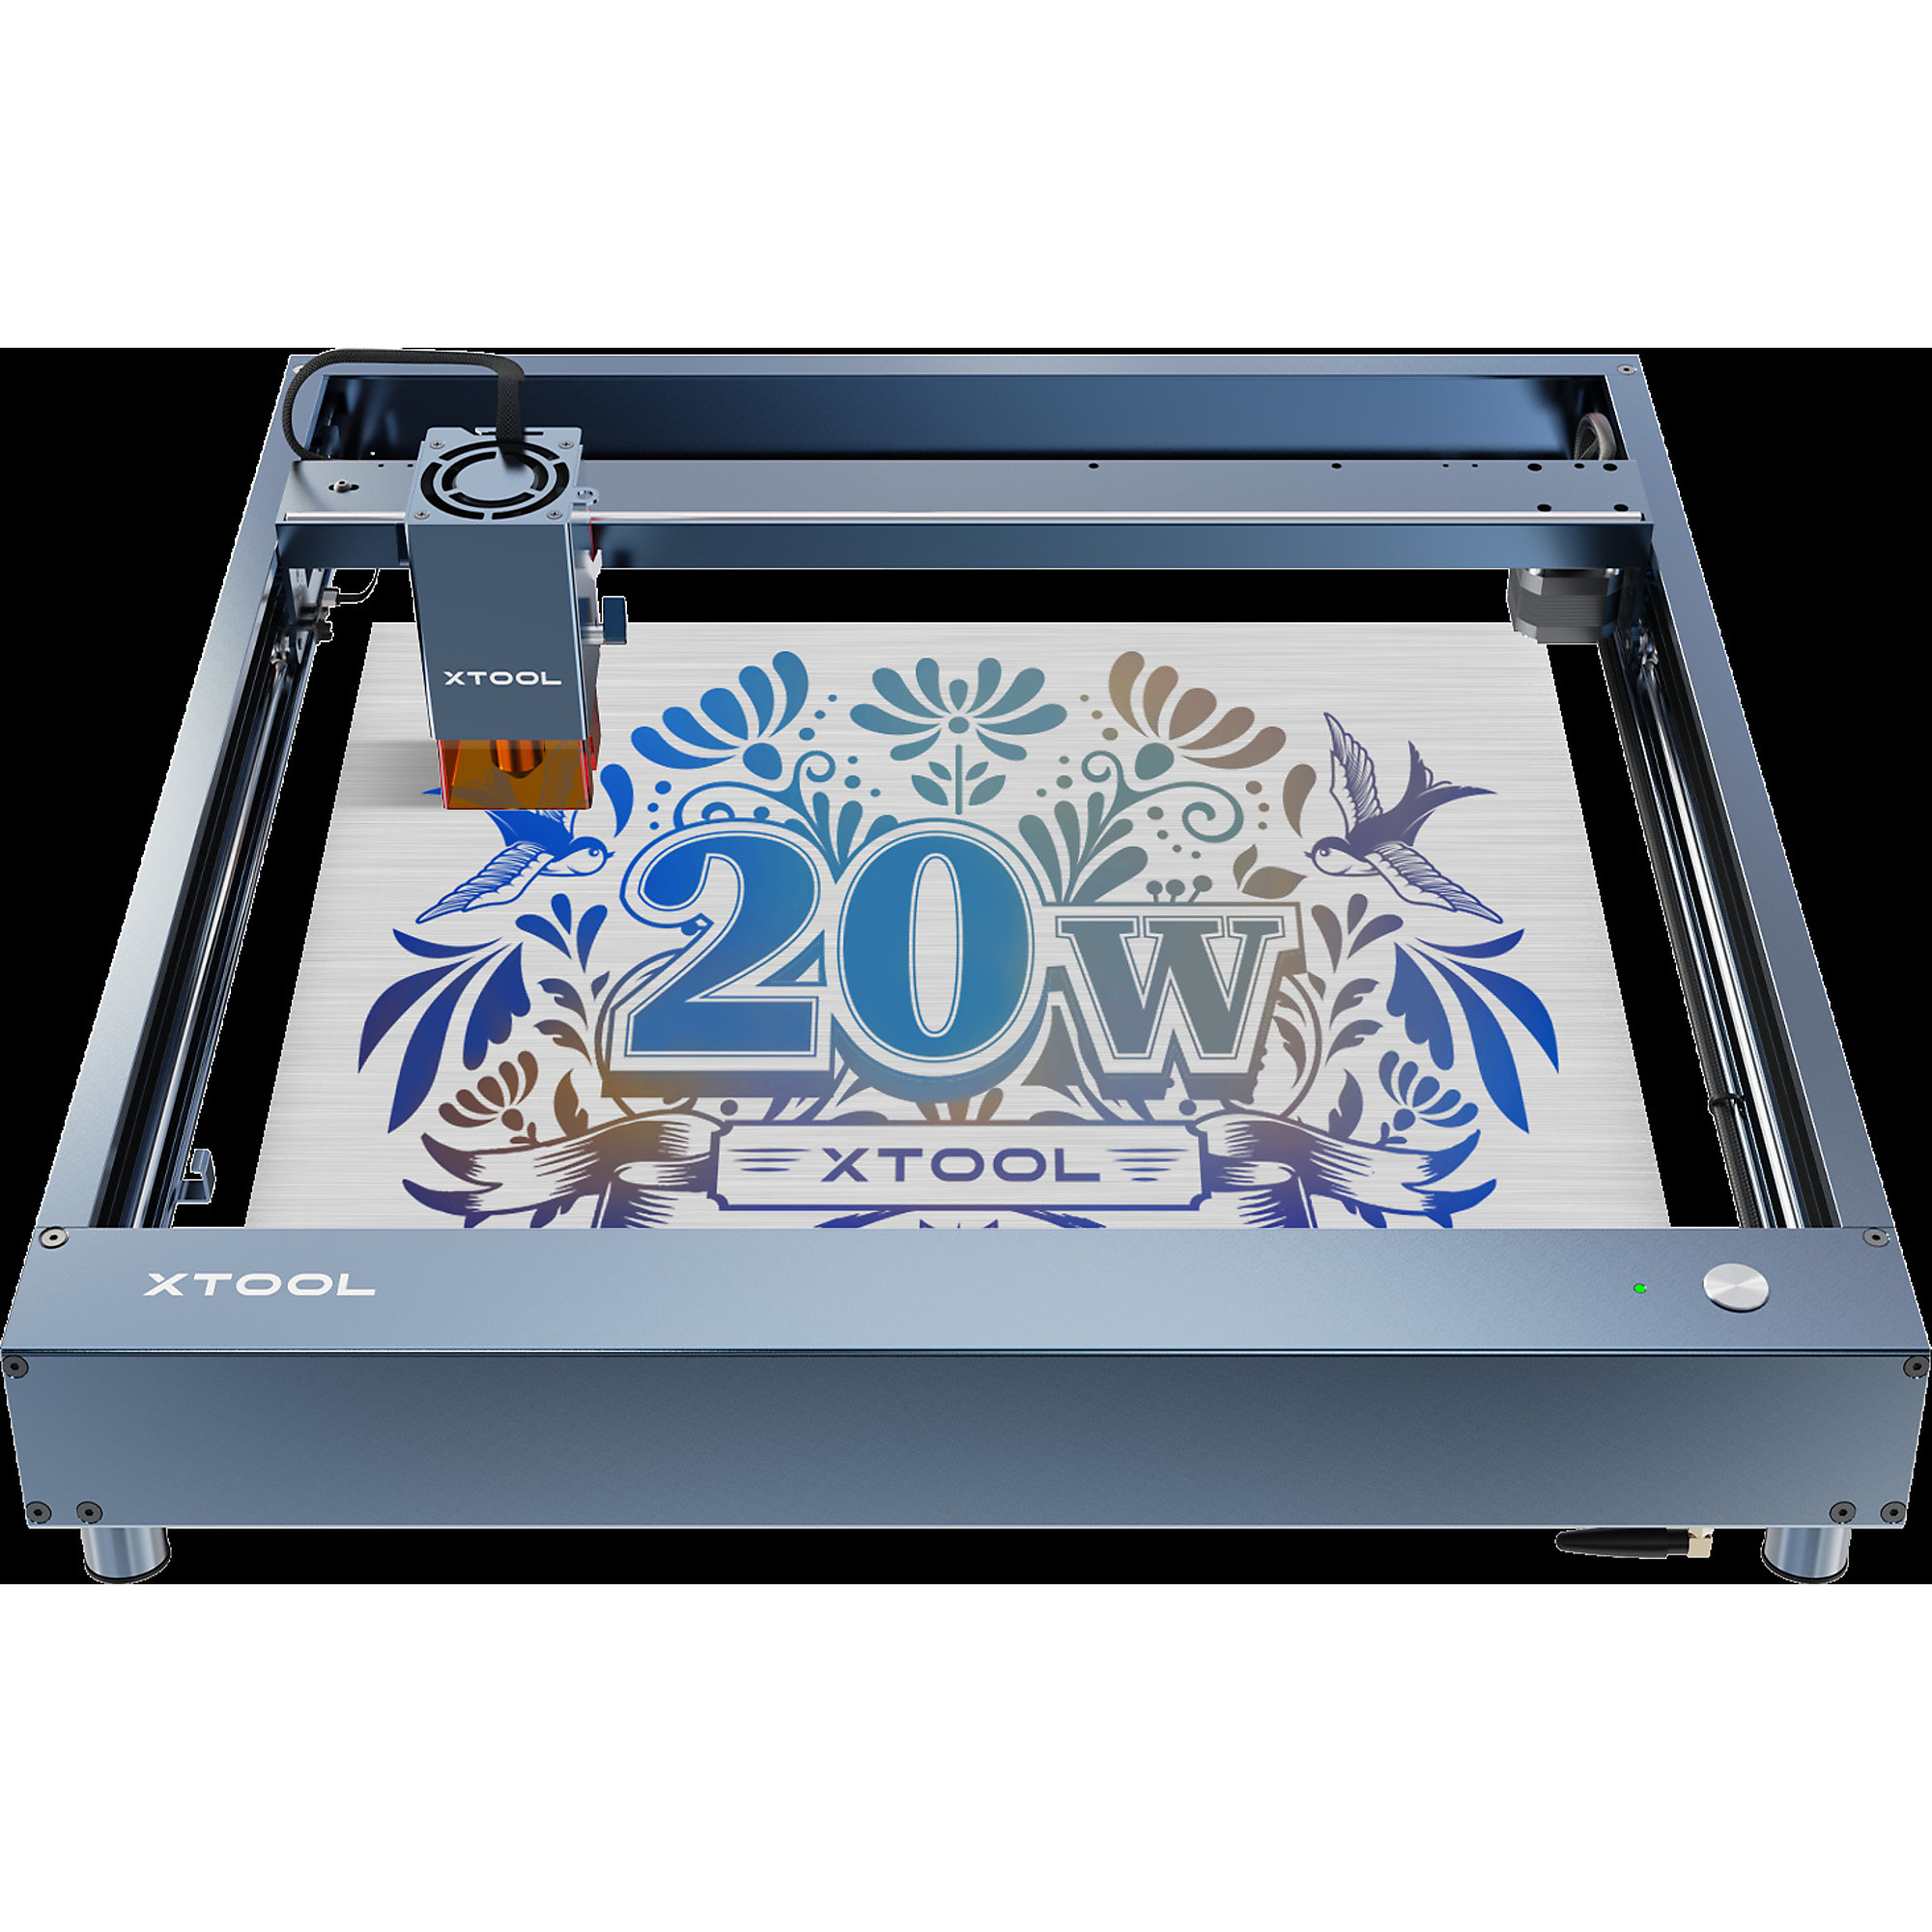 xTool, Laser Cutter and Engraver, 20w, 400mm/s, Model, Working Width 14.57 in, Working Length 31.89 in, Laser Power 20 W, Model P1030254